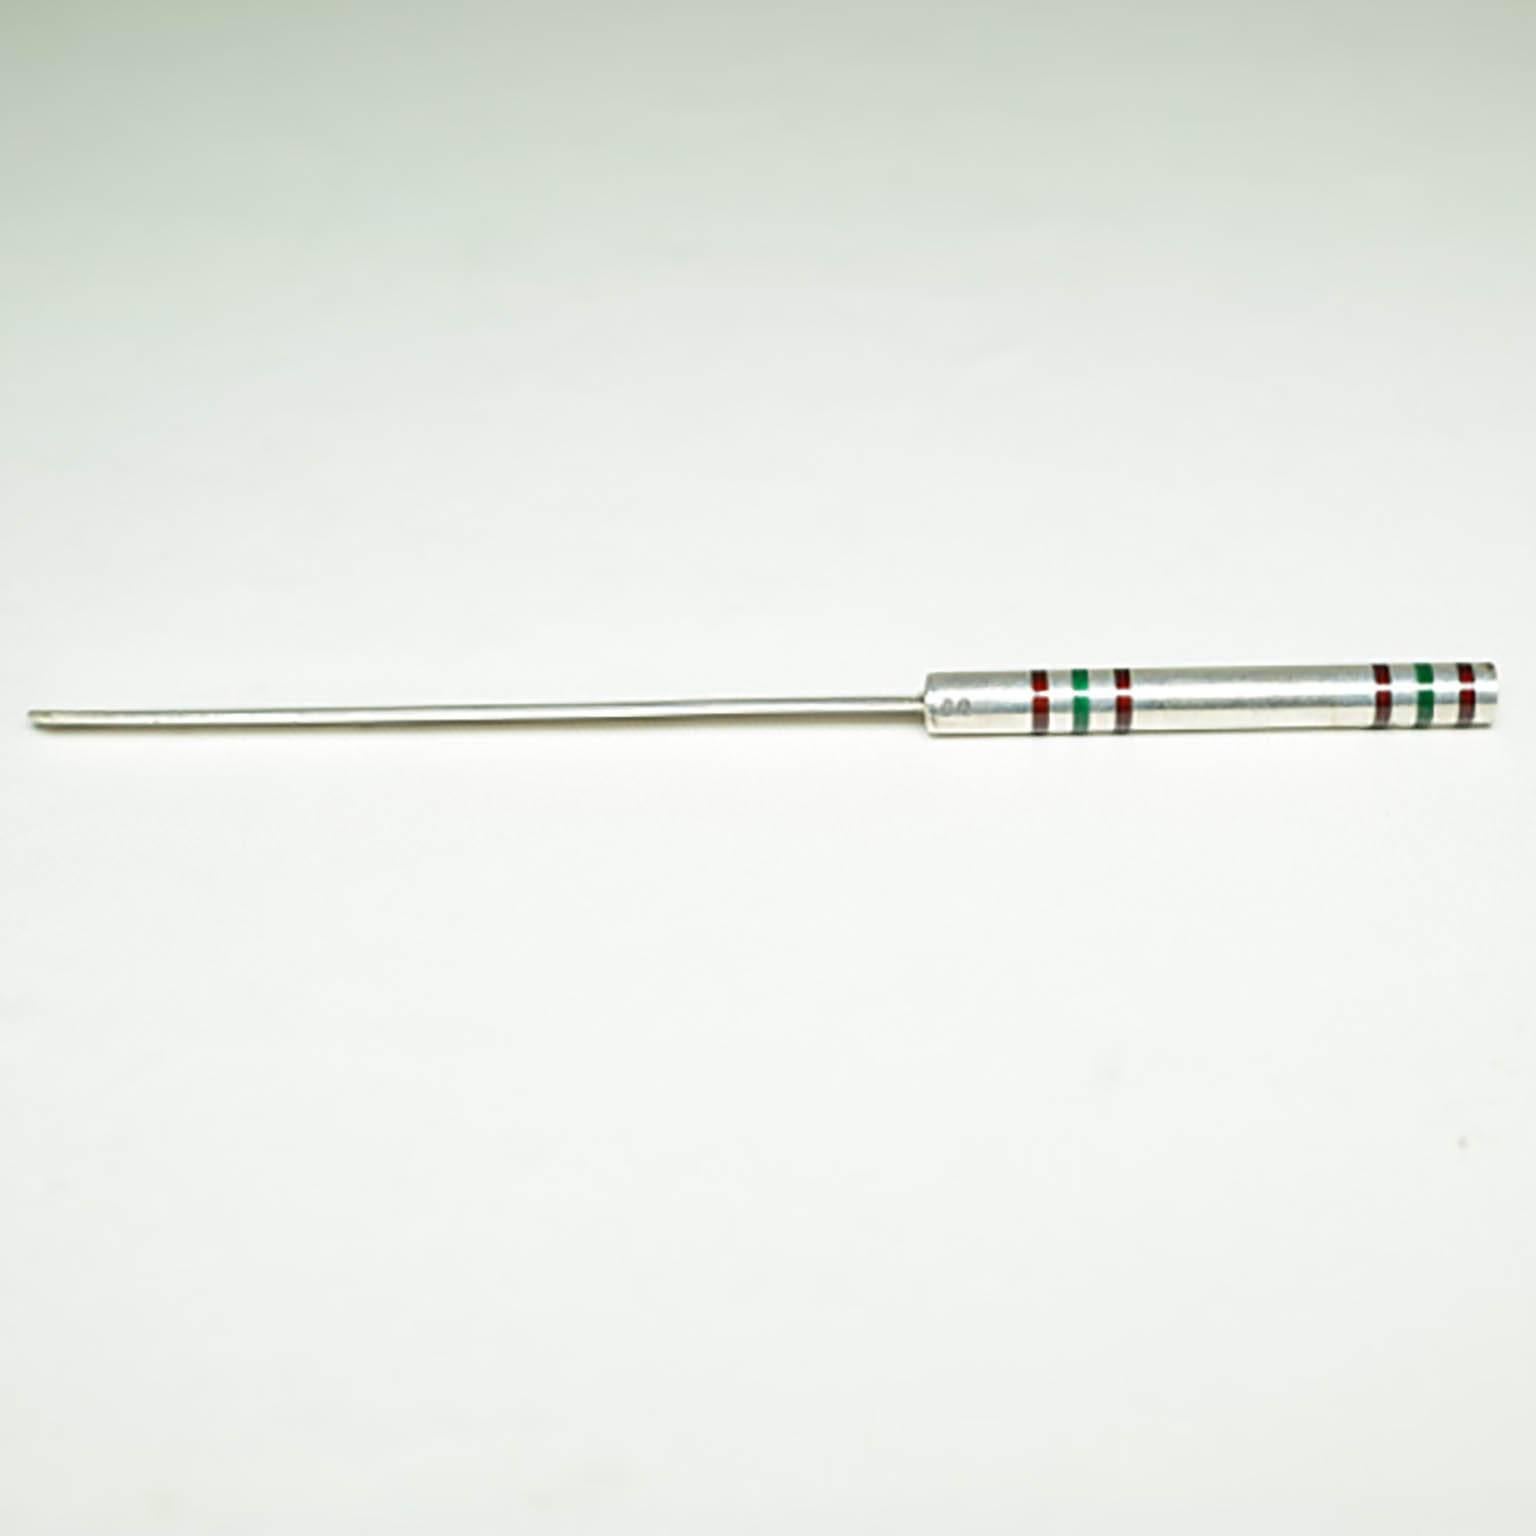 Sterling silver letter opener from Tiffany with bands of green and red enamel.